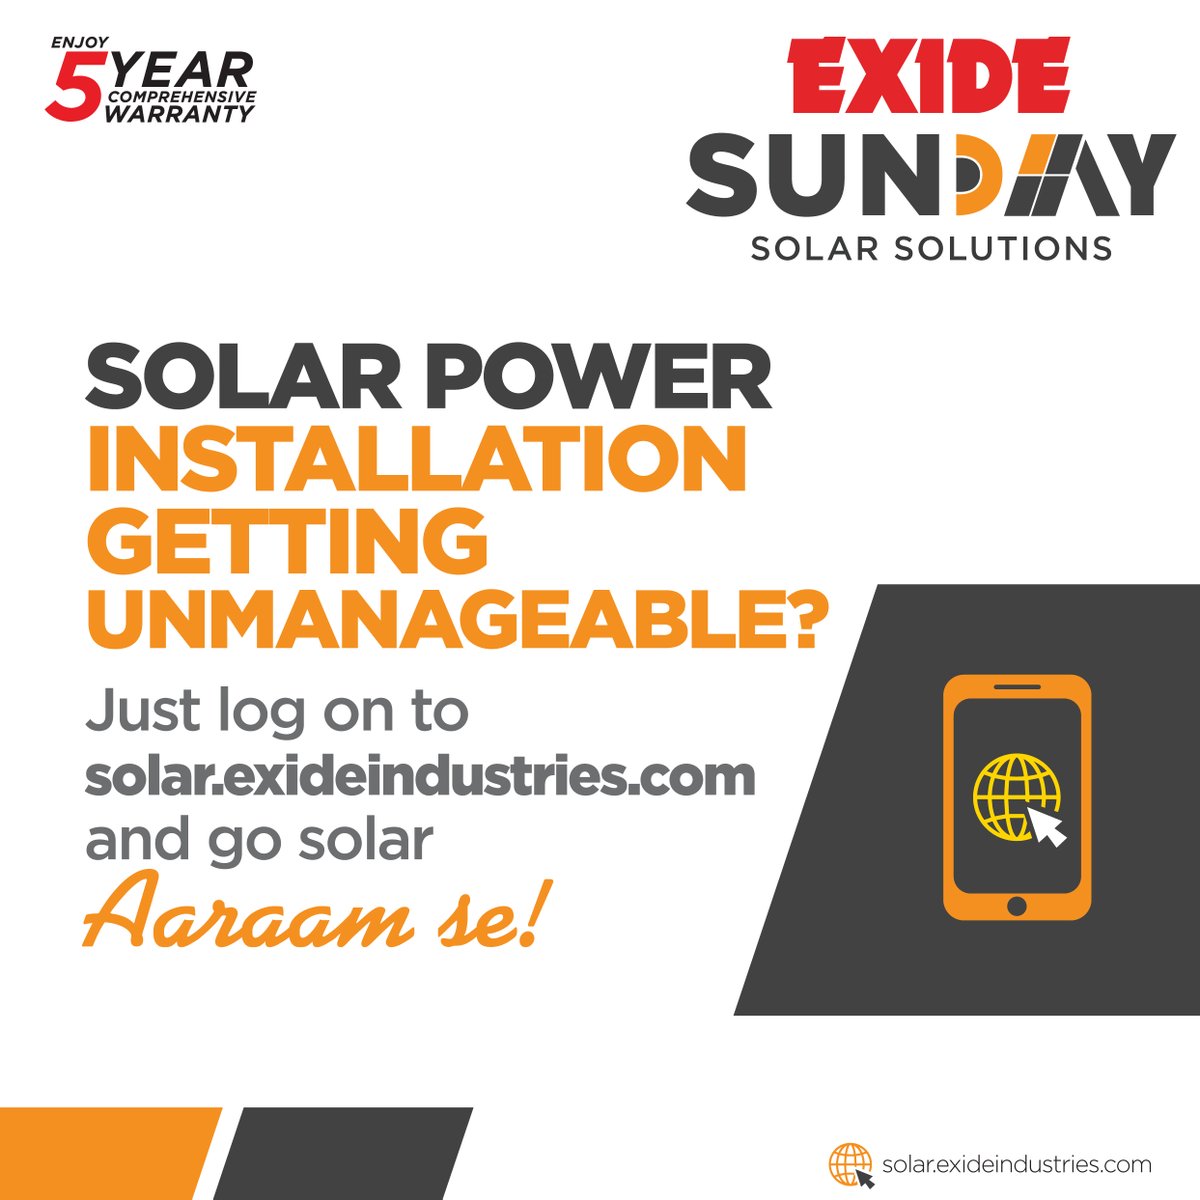 Exide Sunday has solutions for all your solar problems. Just log on to our website, fill in your details and our industry experts will do the rest.
#Exide #SustainableEnergy #SundayLiving #ExideSolar